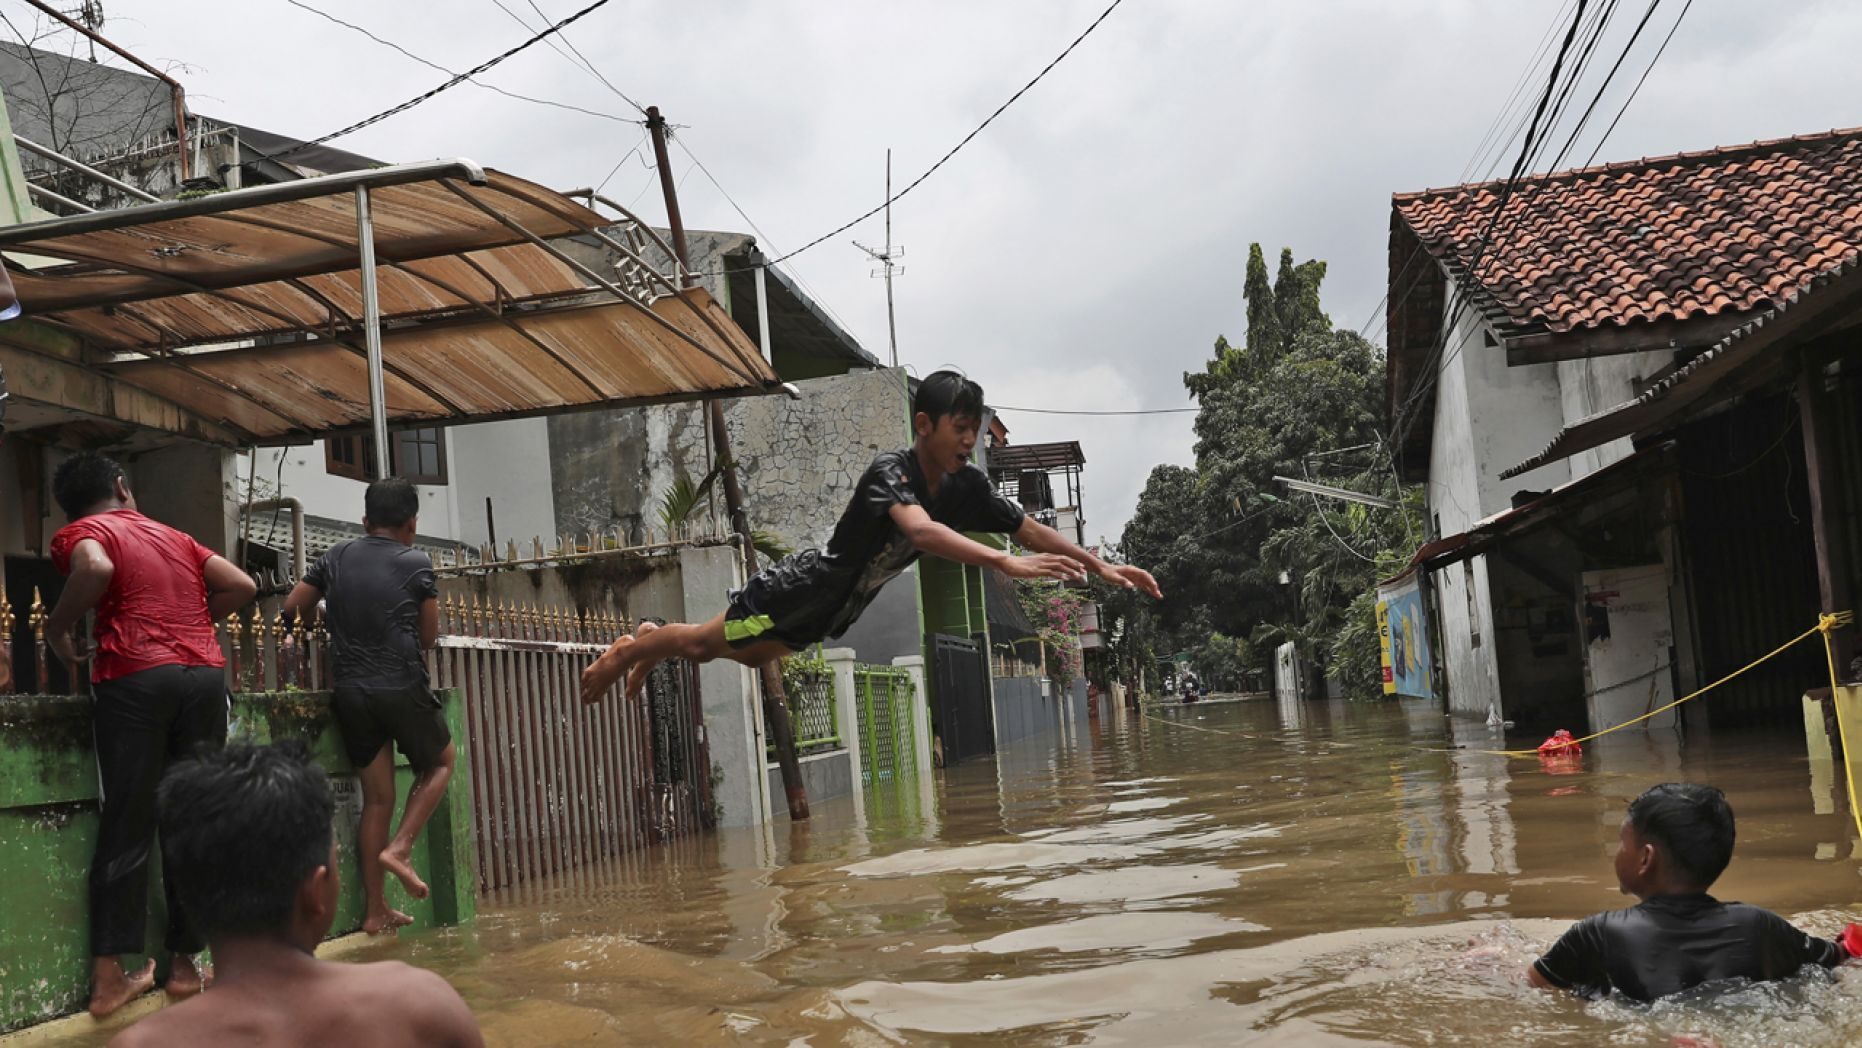 Indonesian youths play in flood water in a community in Jakarta, Indonesia, Tuesday, Feb. 25, 2020.